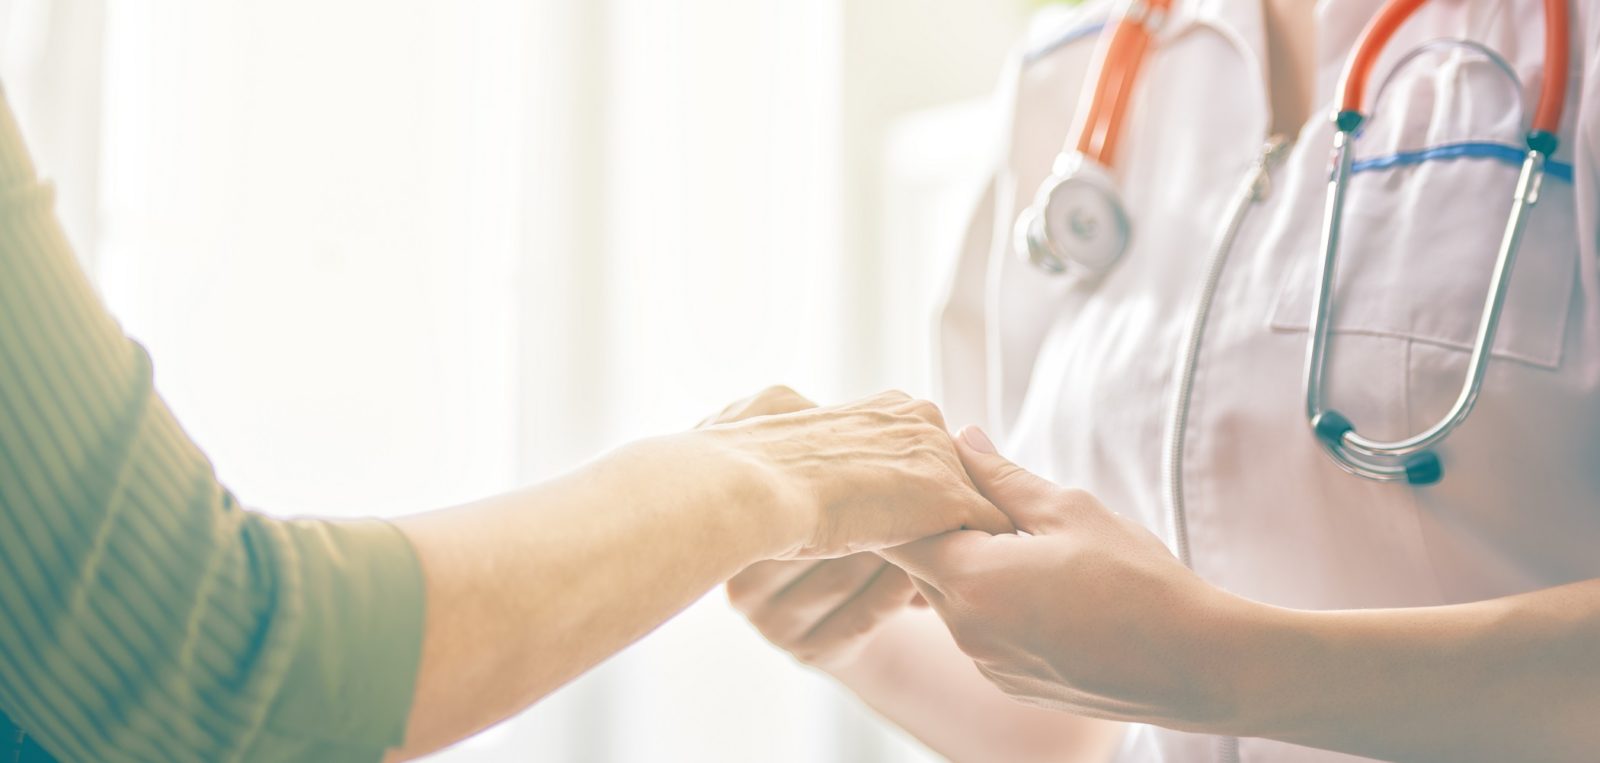 cancer care stock image hands patient and doctor